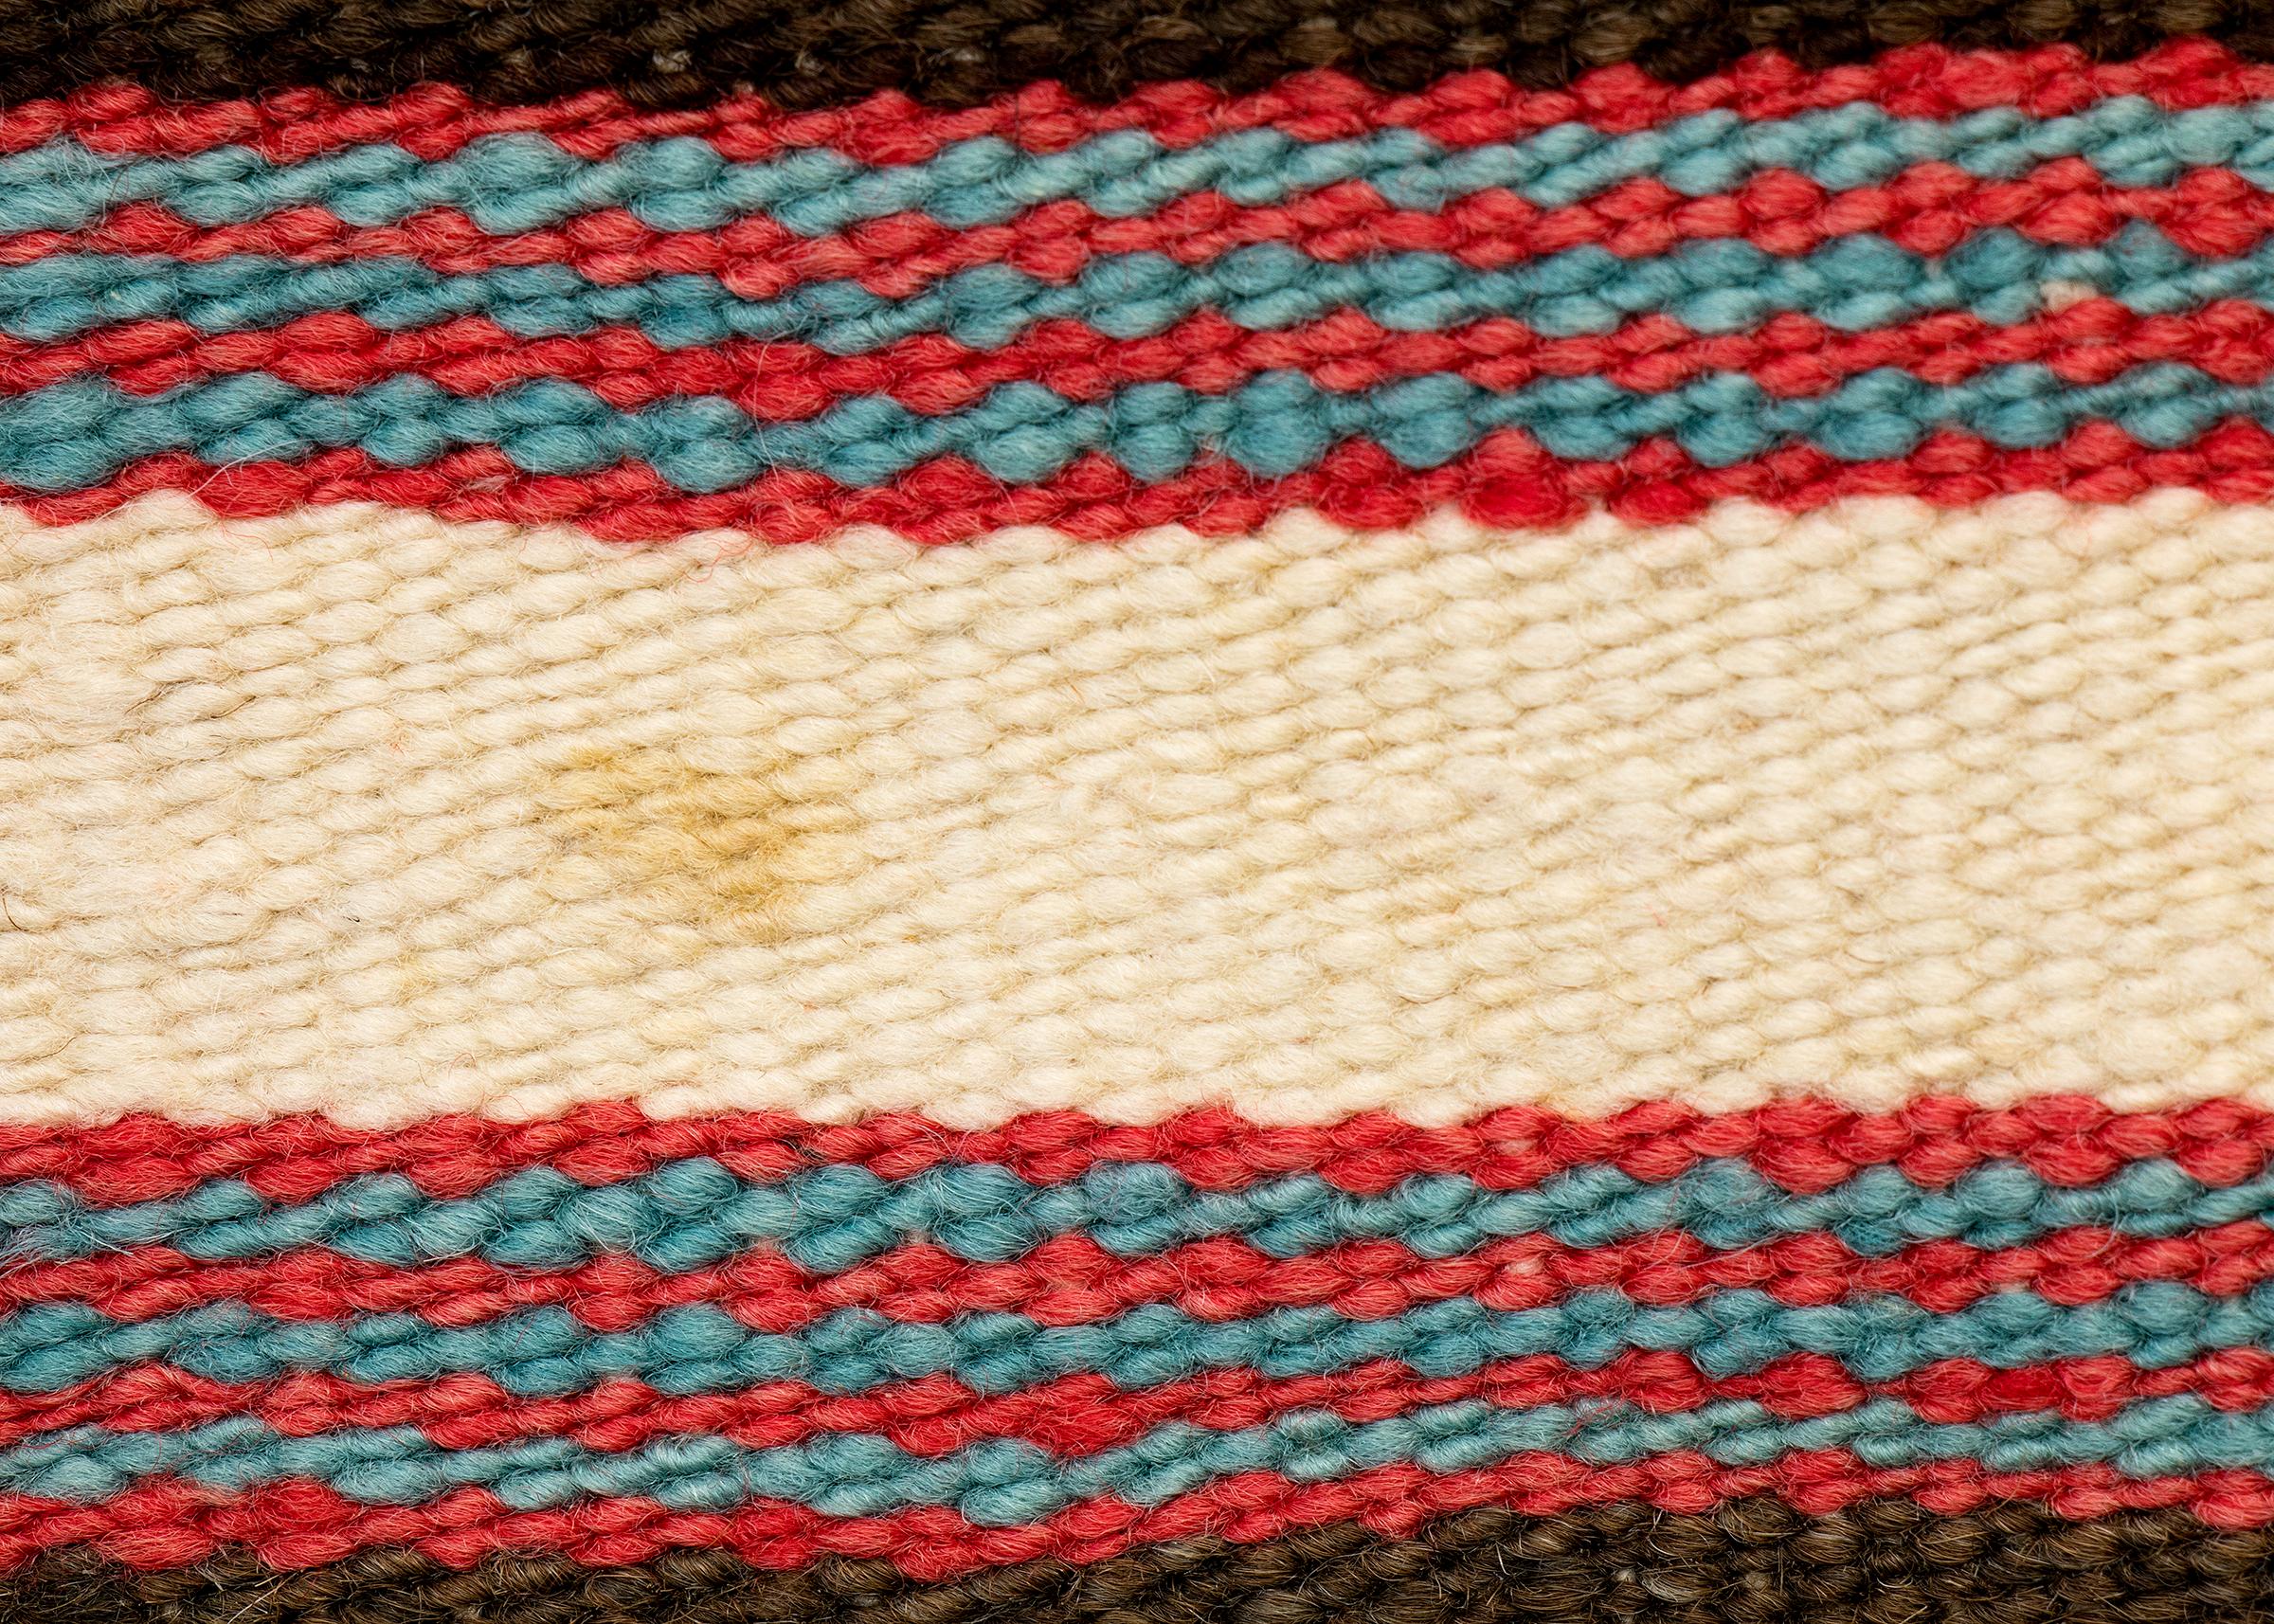 Navajo Rug 1930s, Chinle Stripe & Diamond Pattern Ivory Camel Brown Blue Red In Good Condition For Sale In Denver, CO